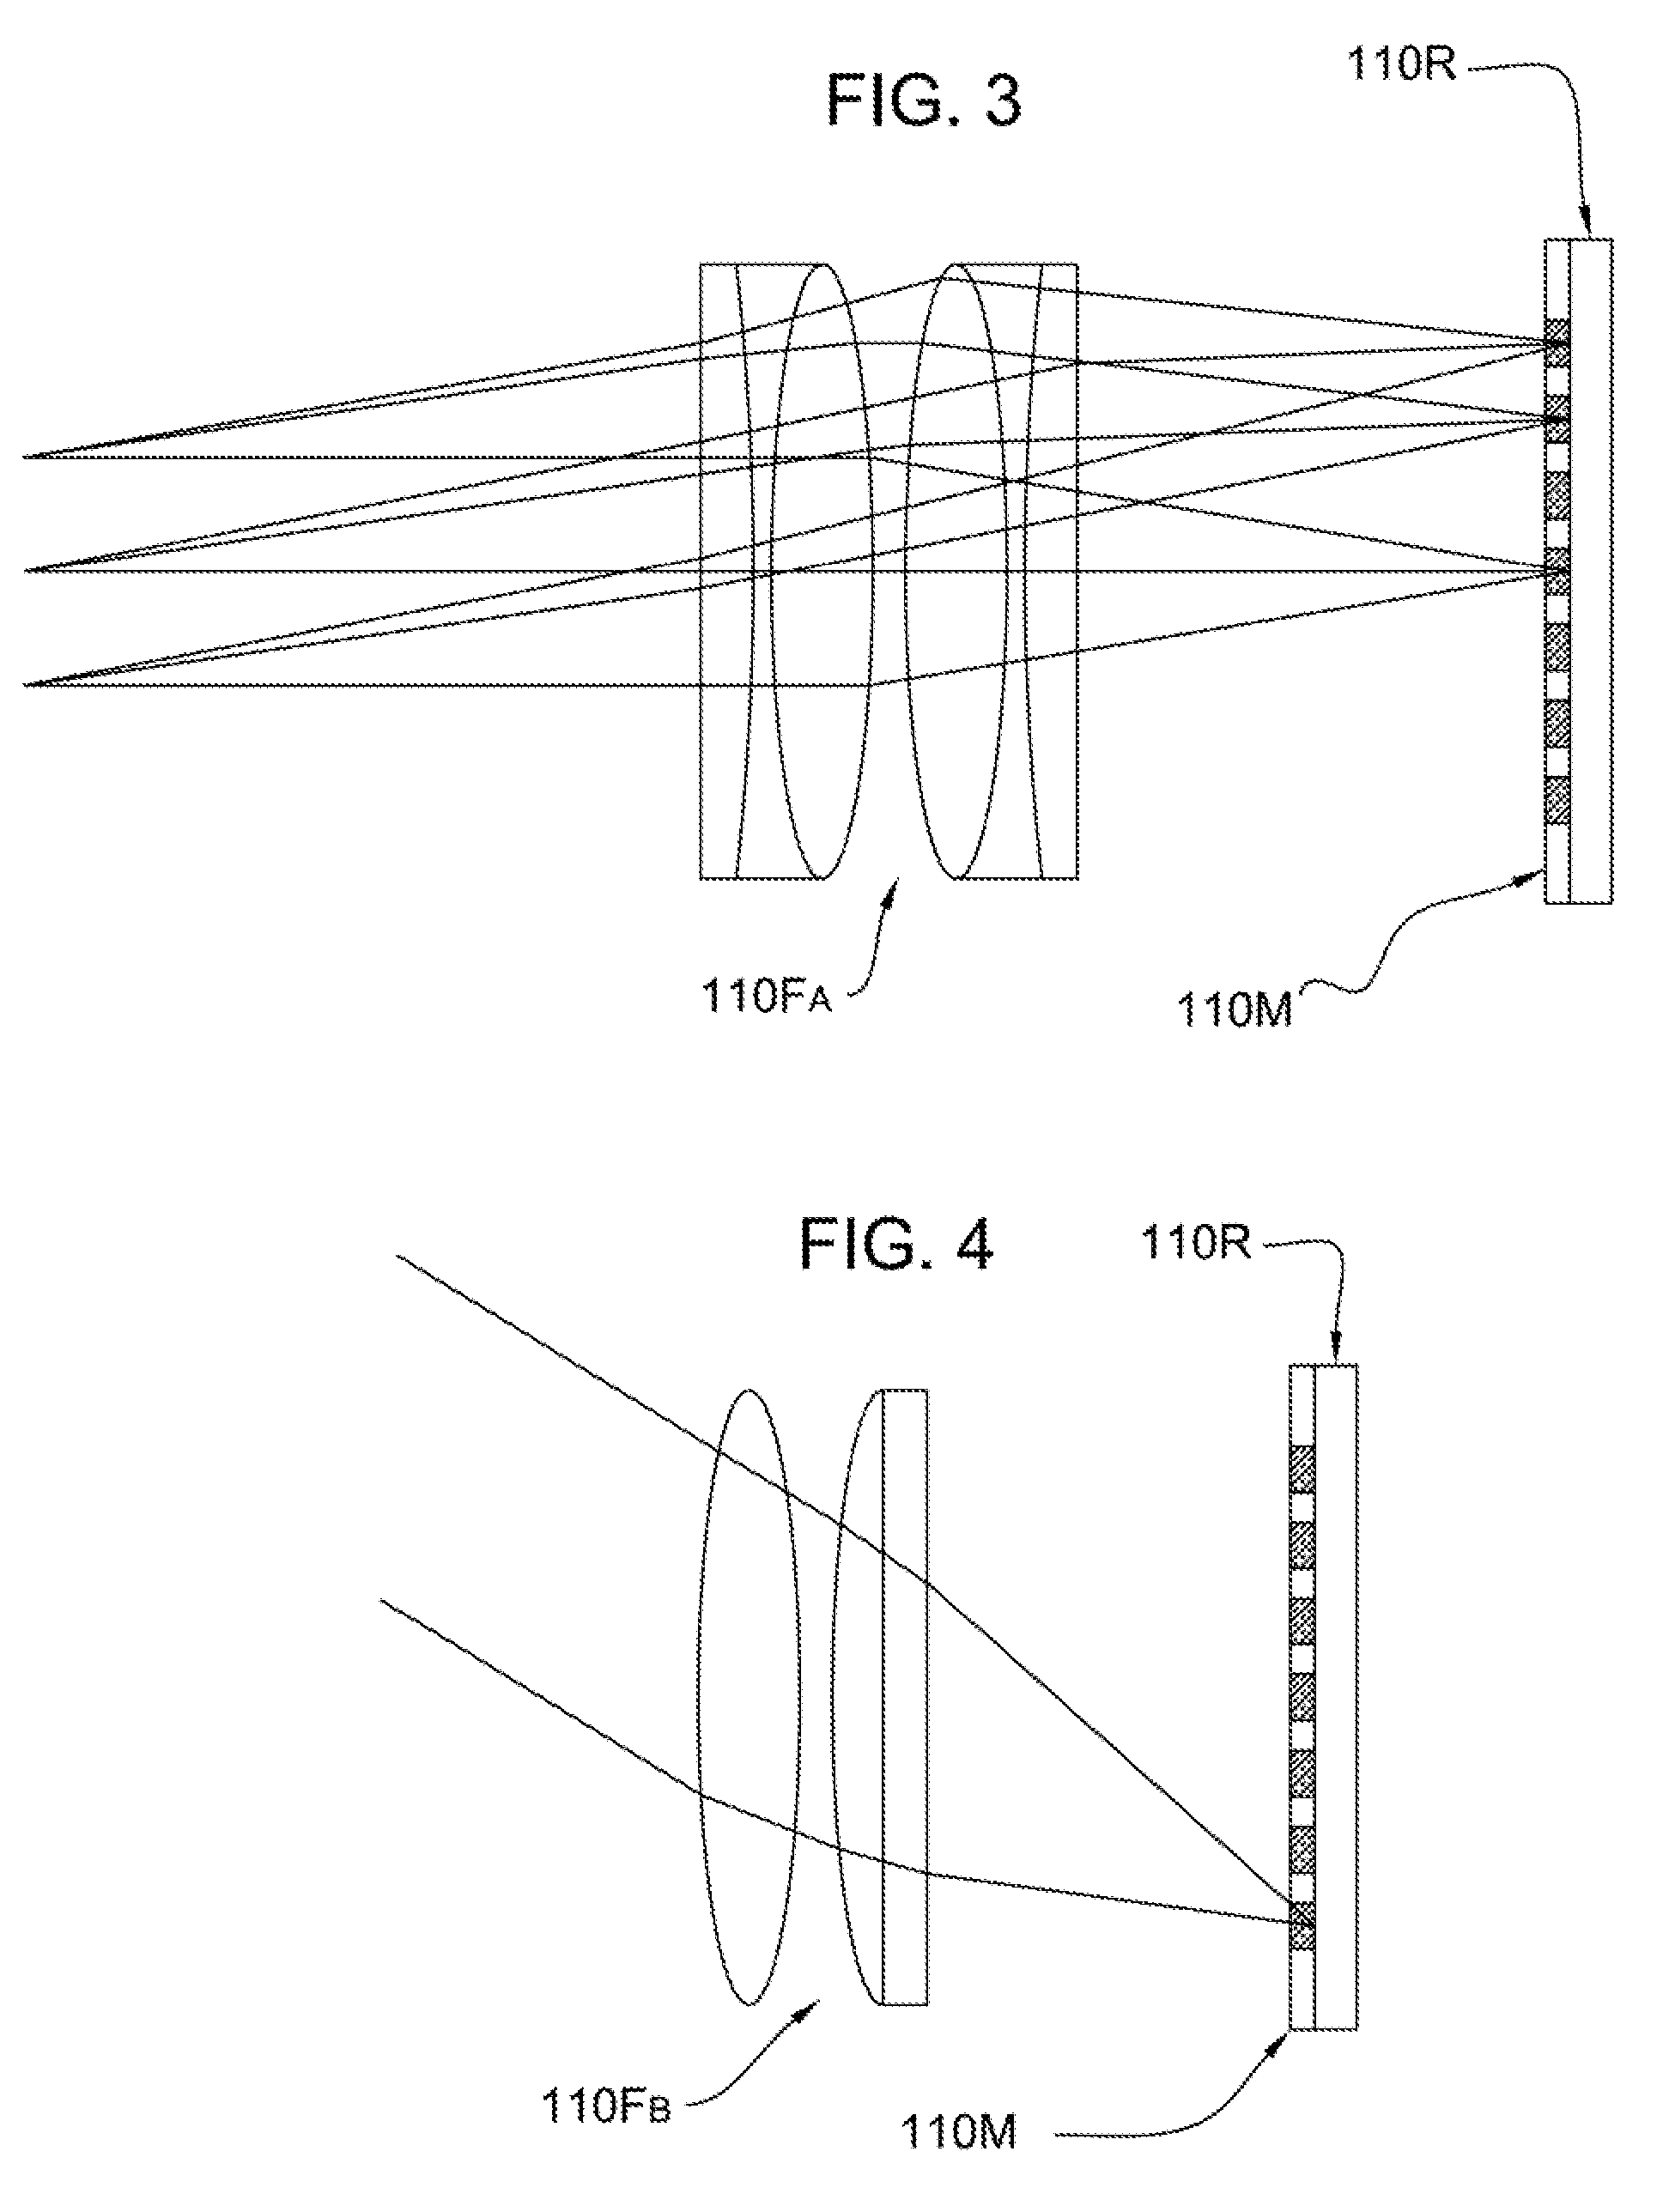 Optical communication system with cats-eye modulating retro-reflector (MRR) assembly, the cats-eye mrr assembly thereof, and the method of optical communication